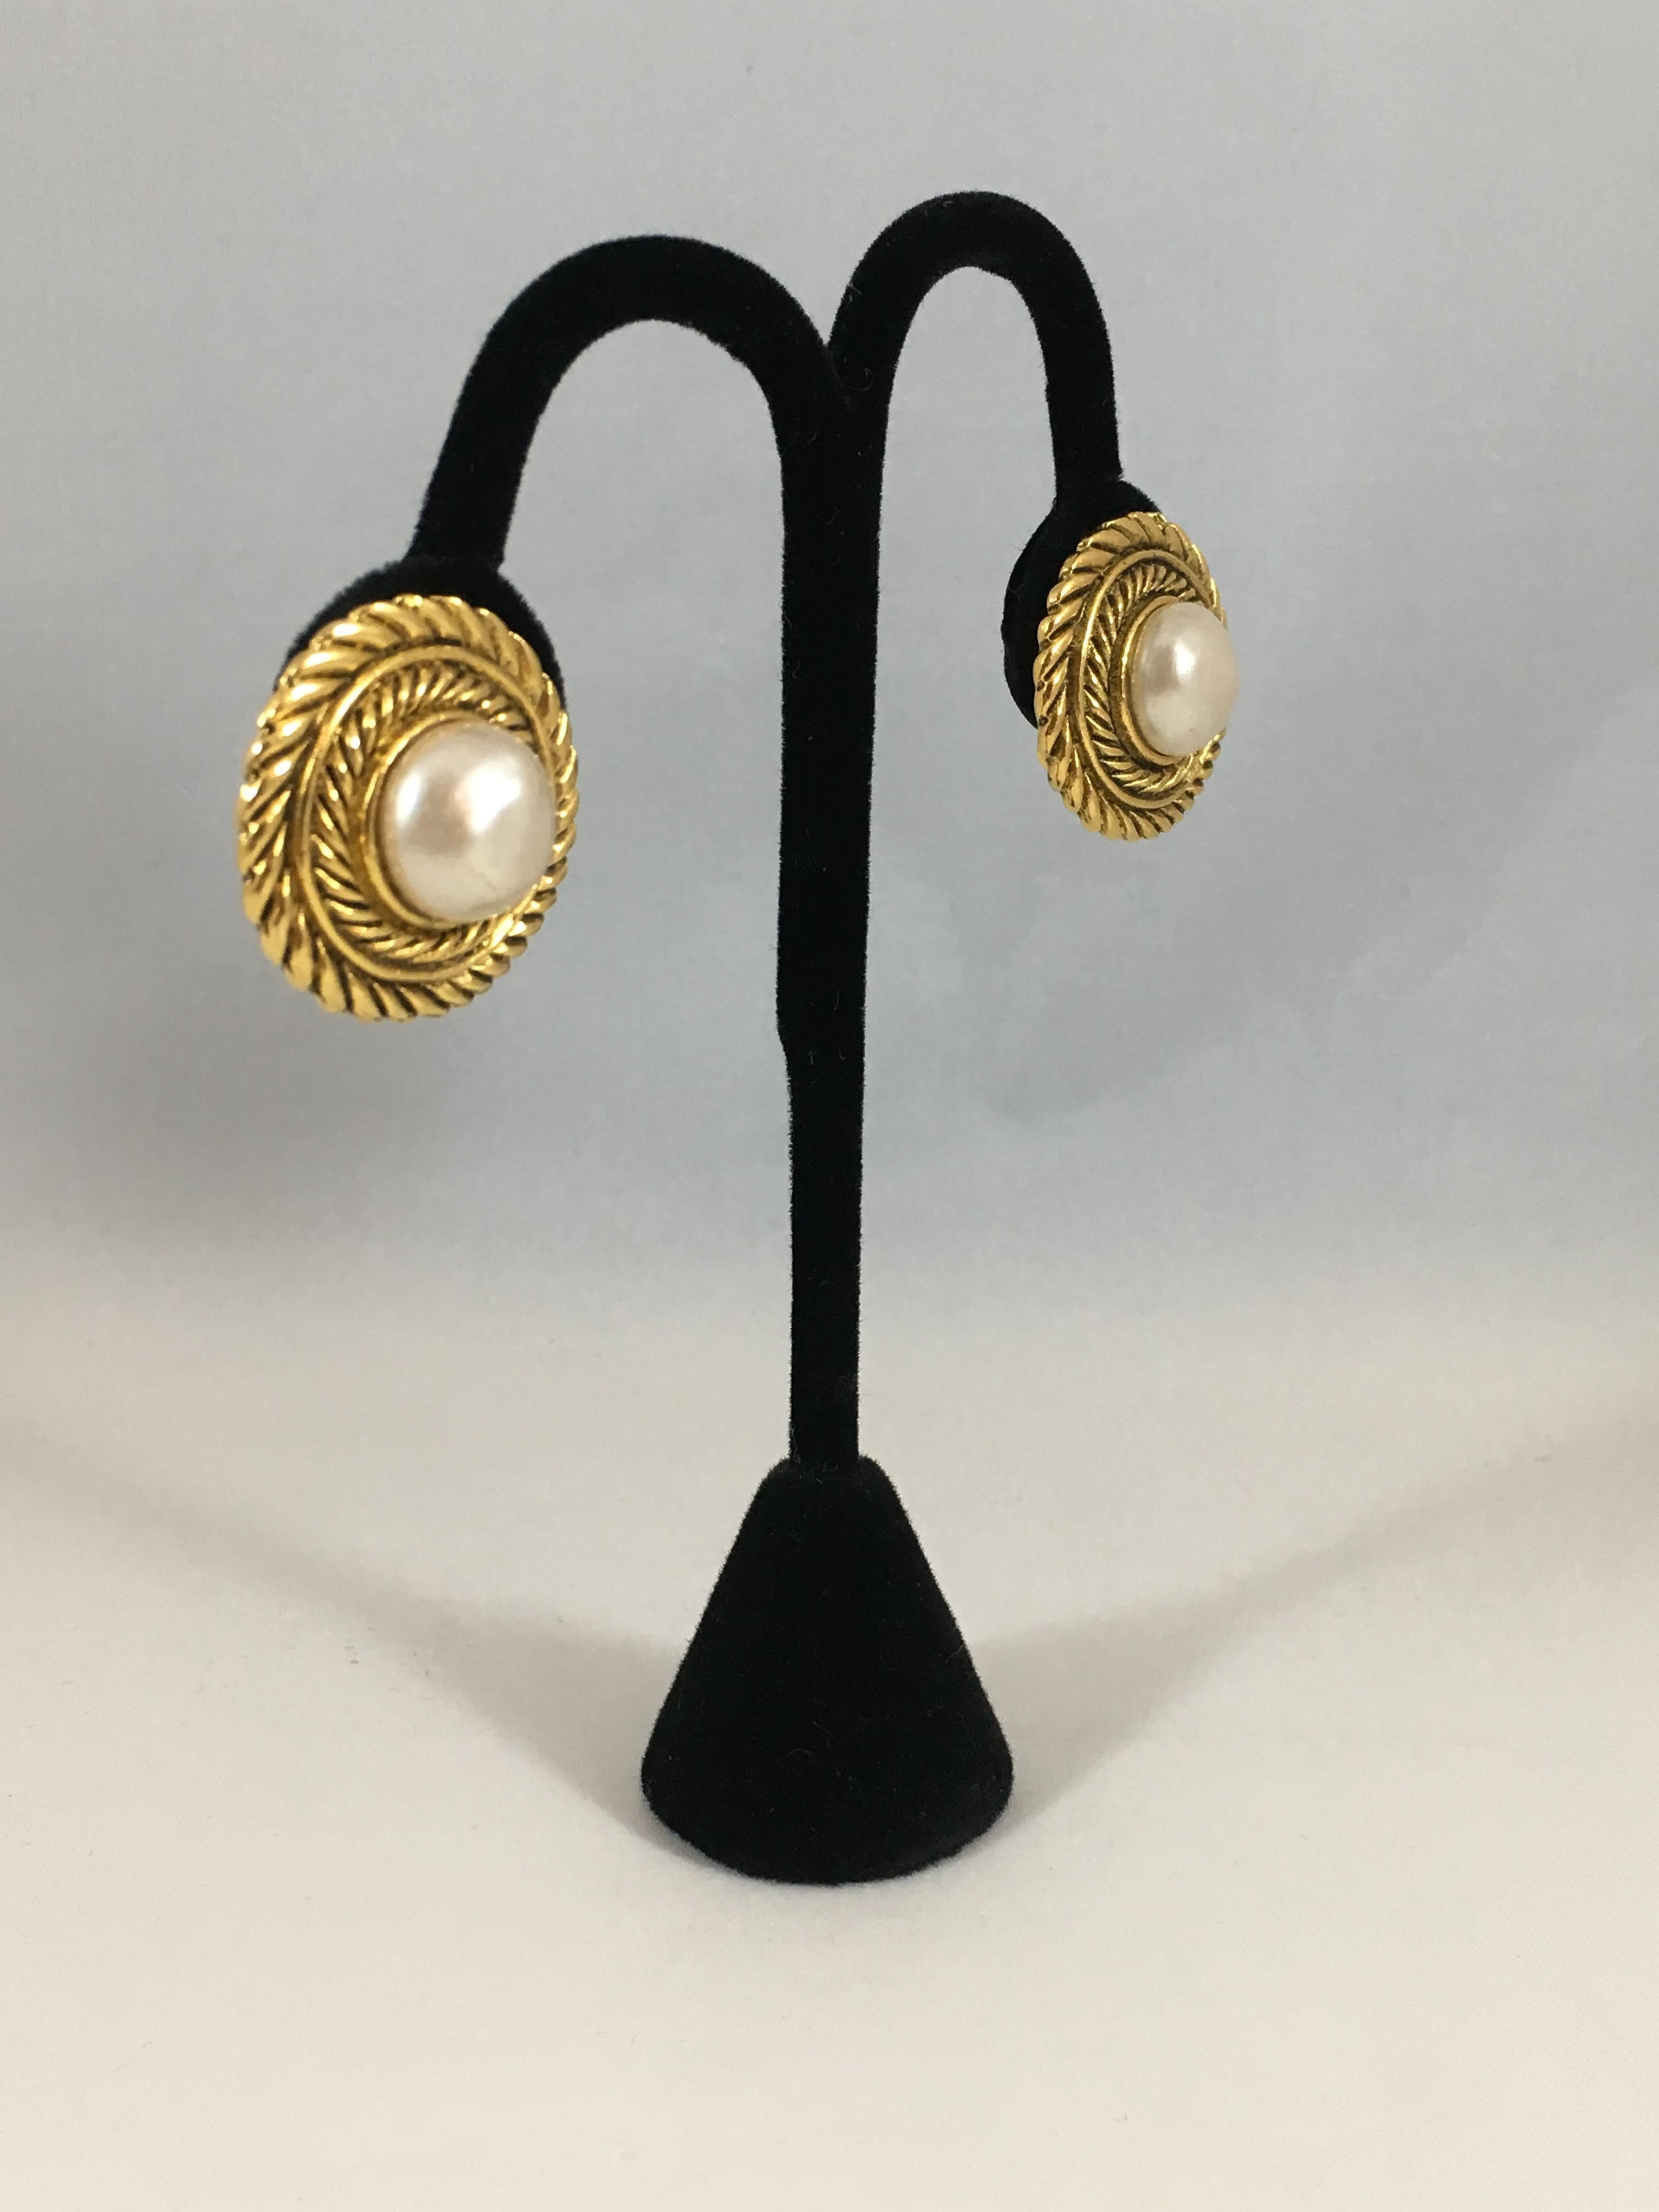 Chanel Pearl and Goldtone Clip-On Earrings in Box 1980s For Sale 2